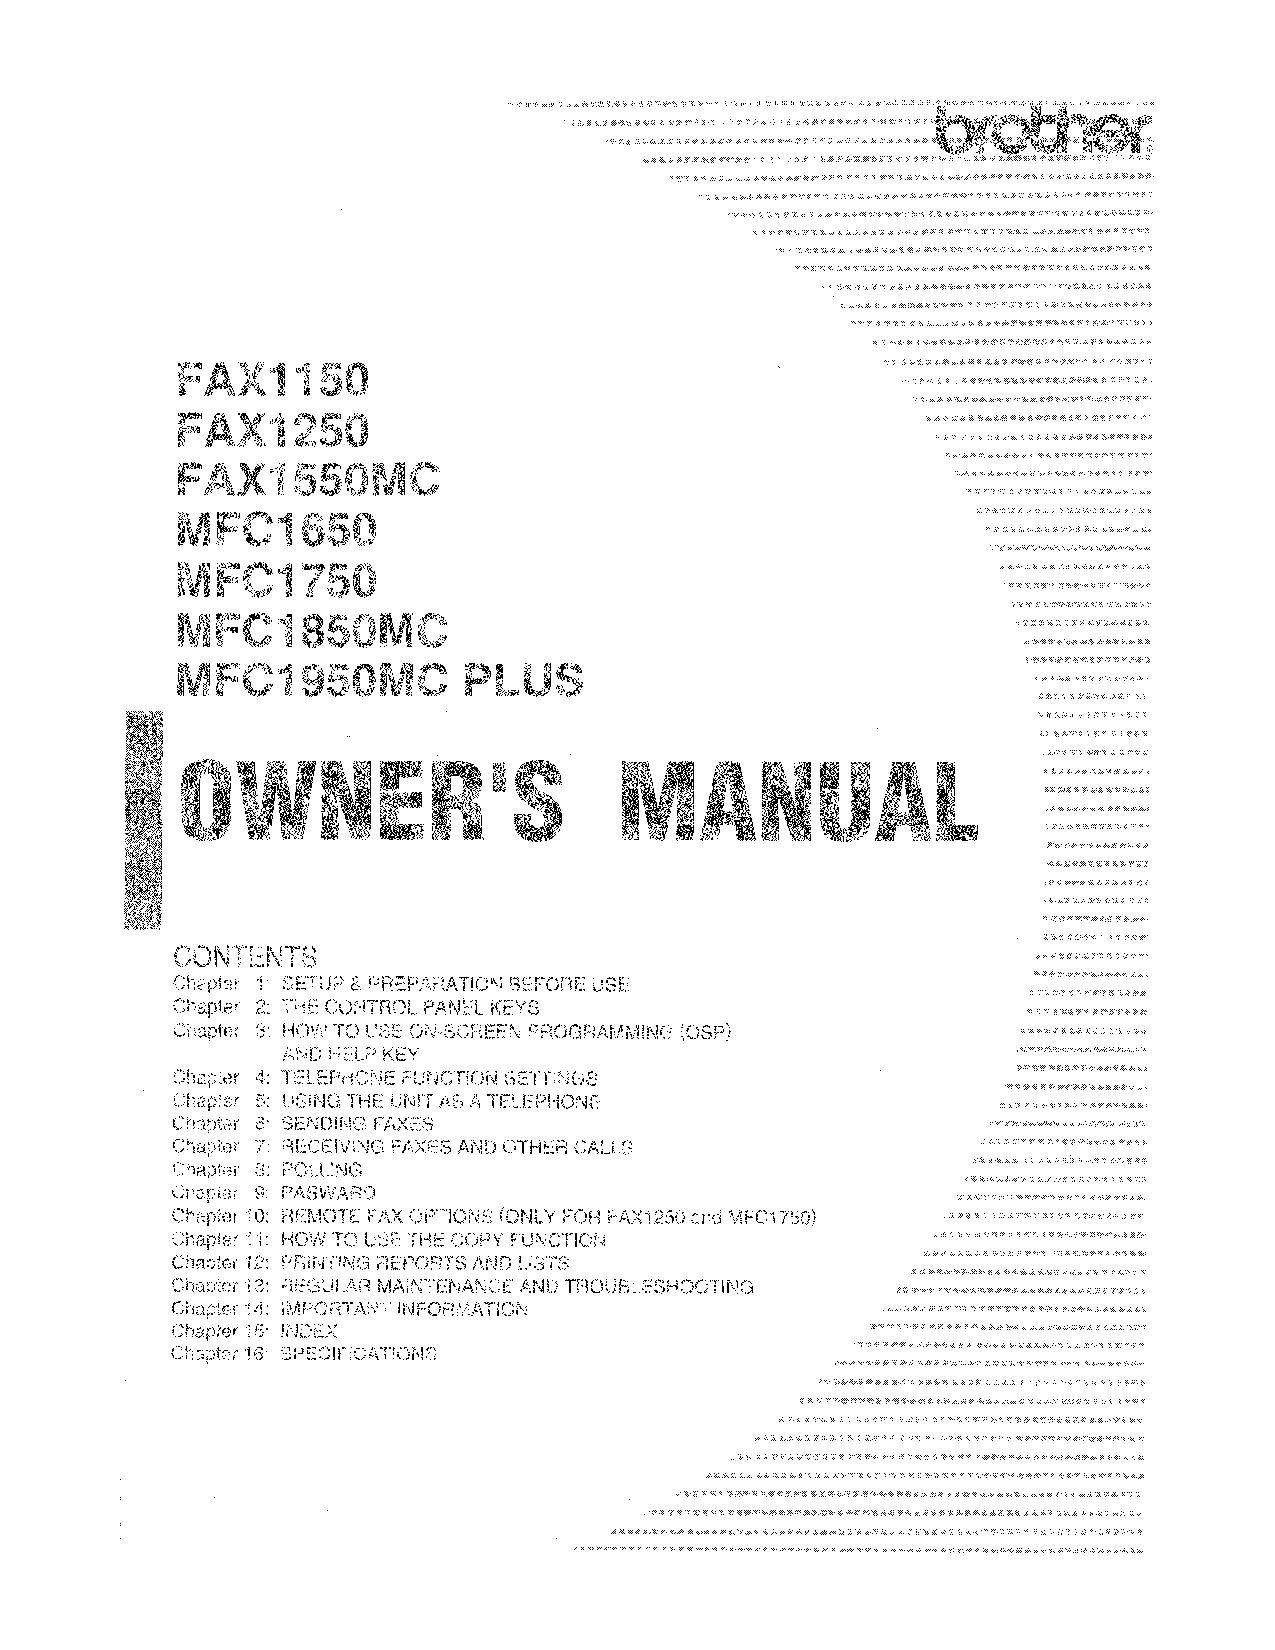 Brother MFC1950MC, MFC1650, MFC1750 User Manual